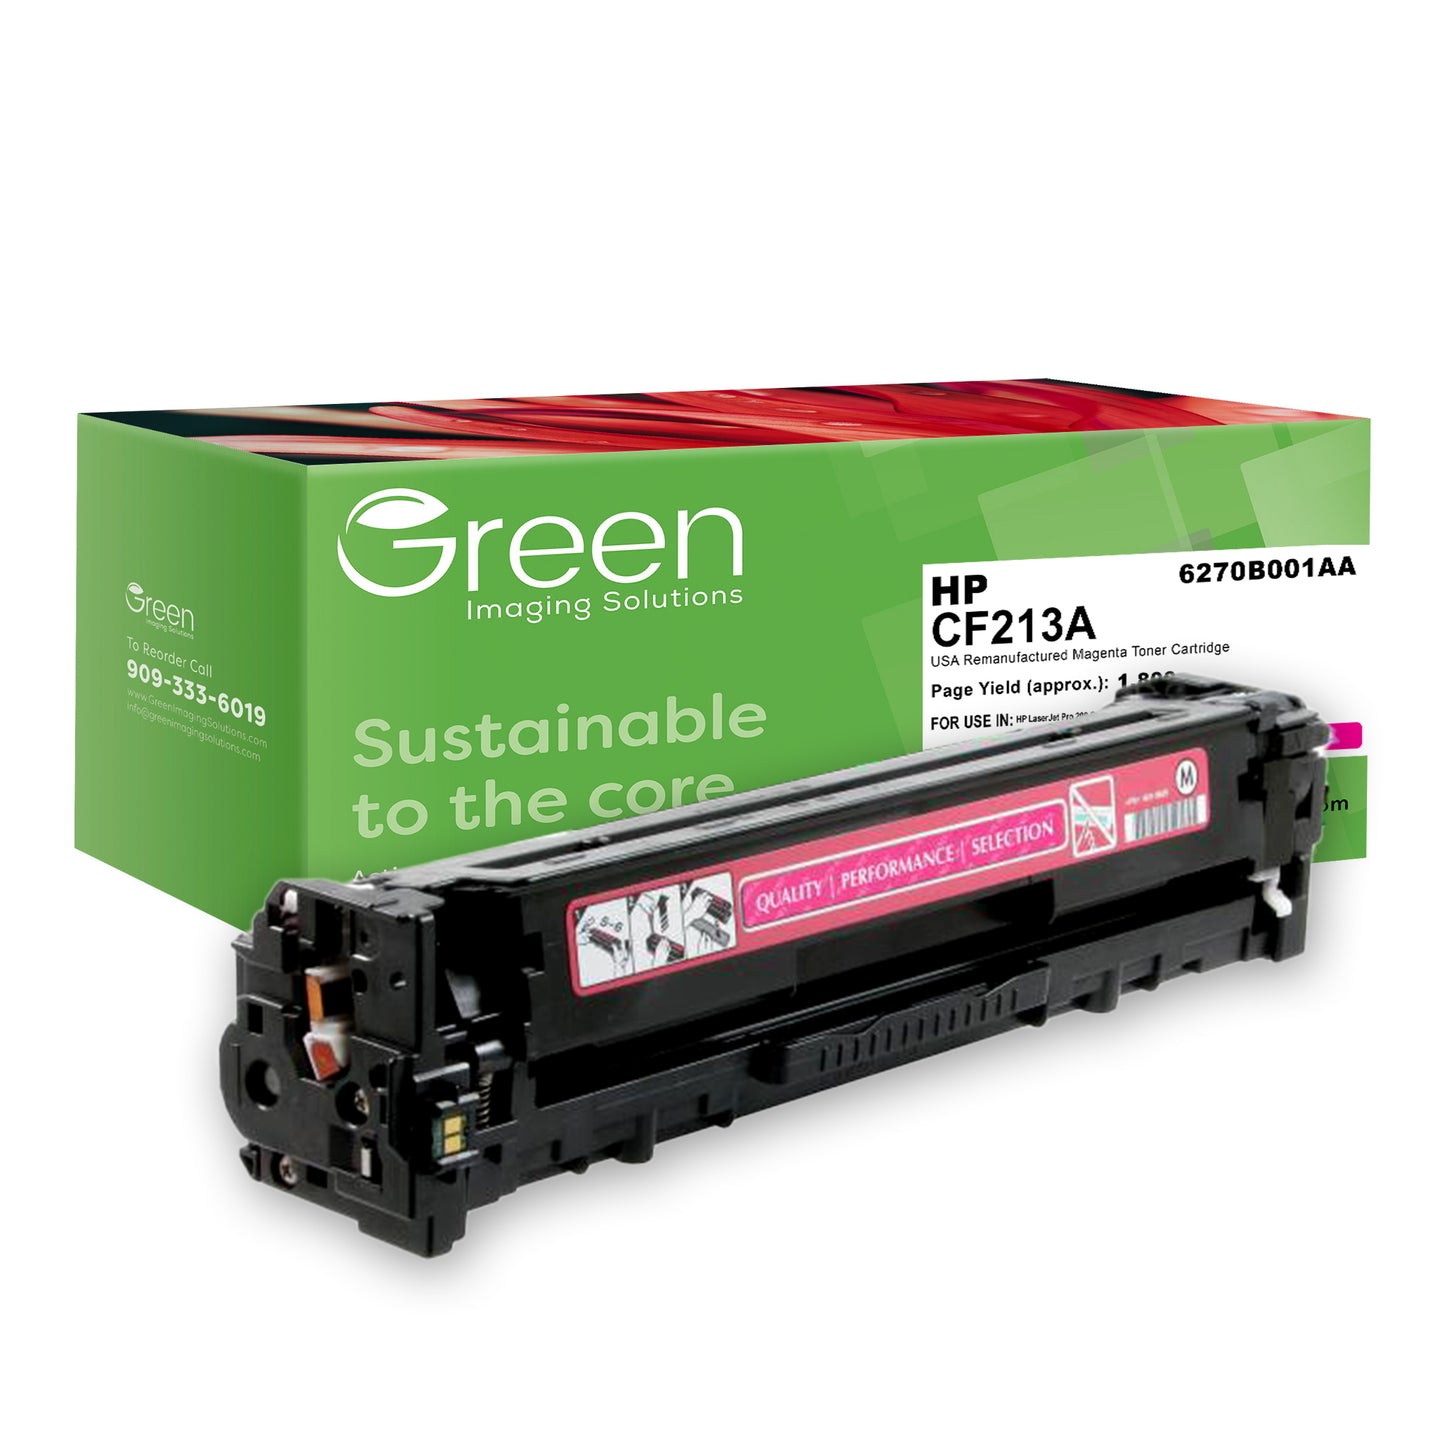 GIS USA Remanufactured Magenta Toner Cartridge for HP CF213A (HP 131A)